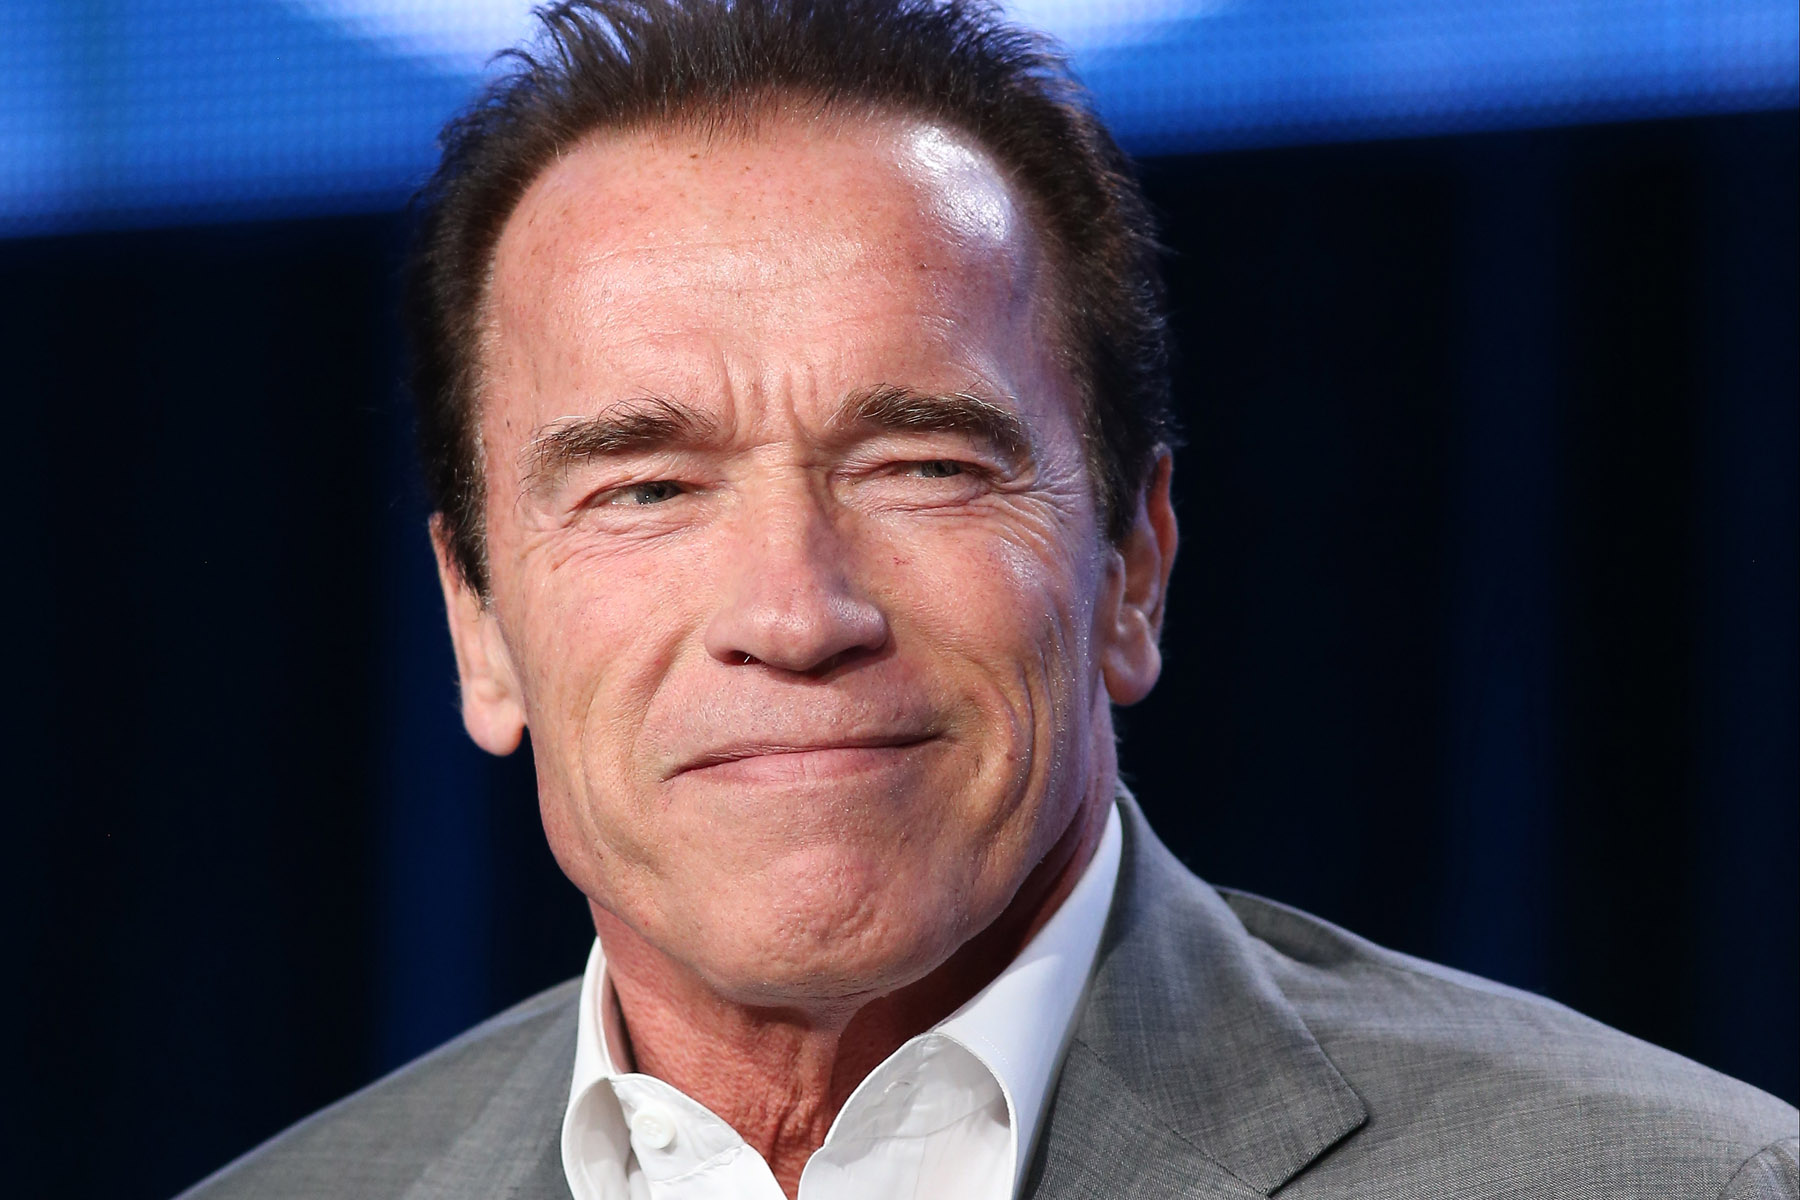 Arnold Schwarzenegger- Who Is The Richest Actor In The World Now? Top 10 List Of Highest-Paid Hollywood Actors In 2022